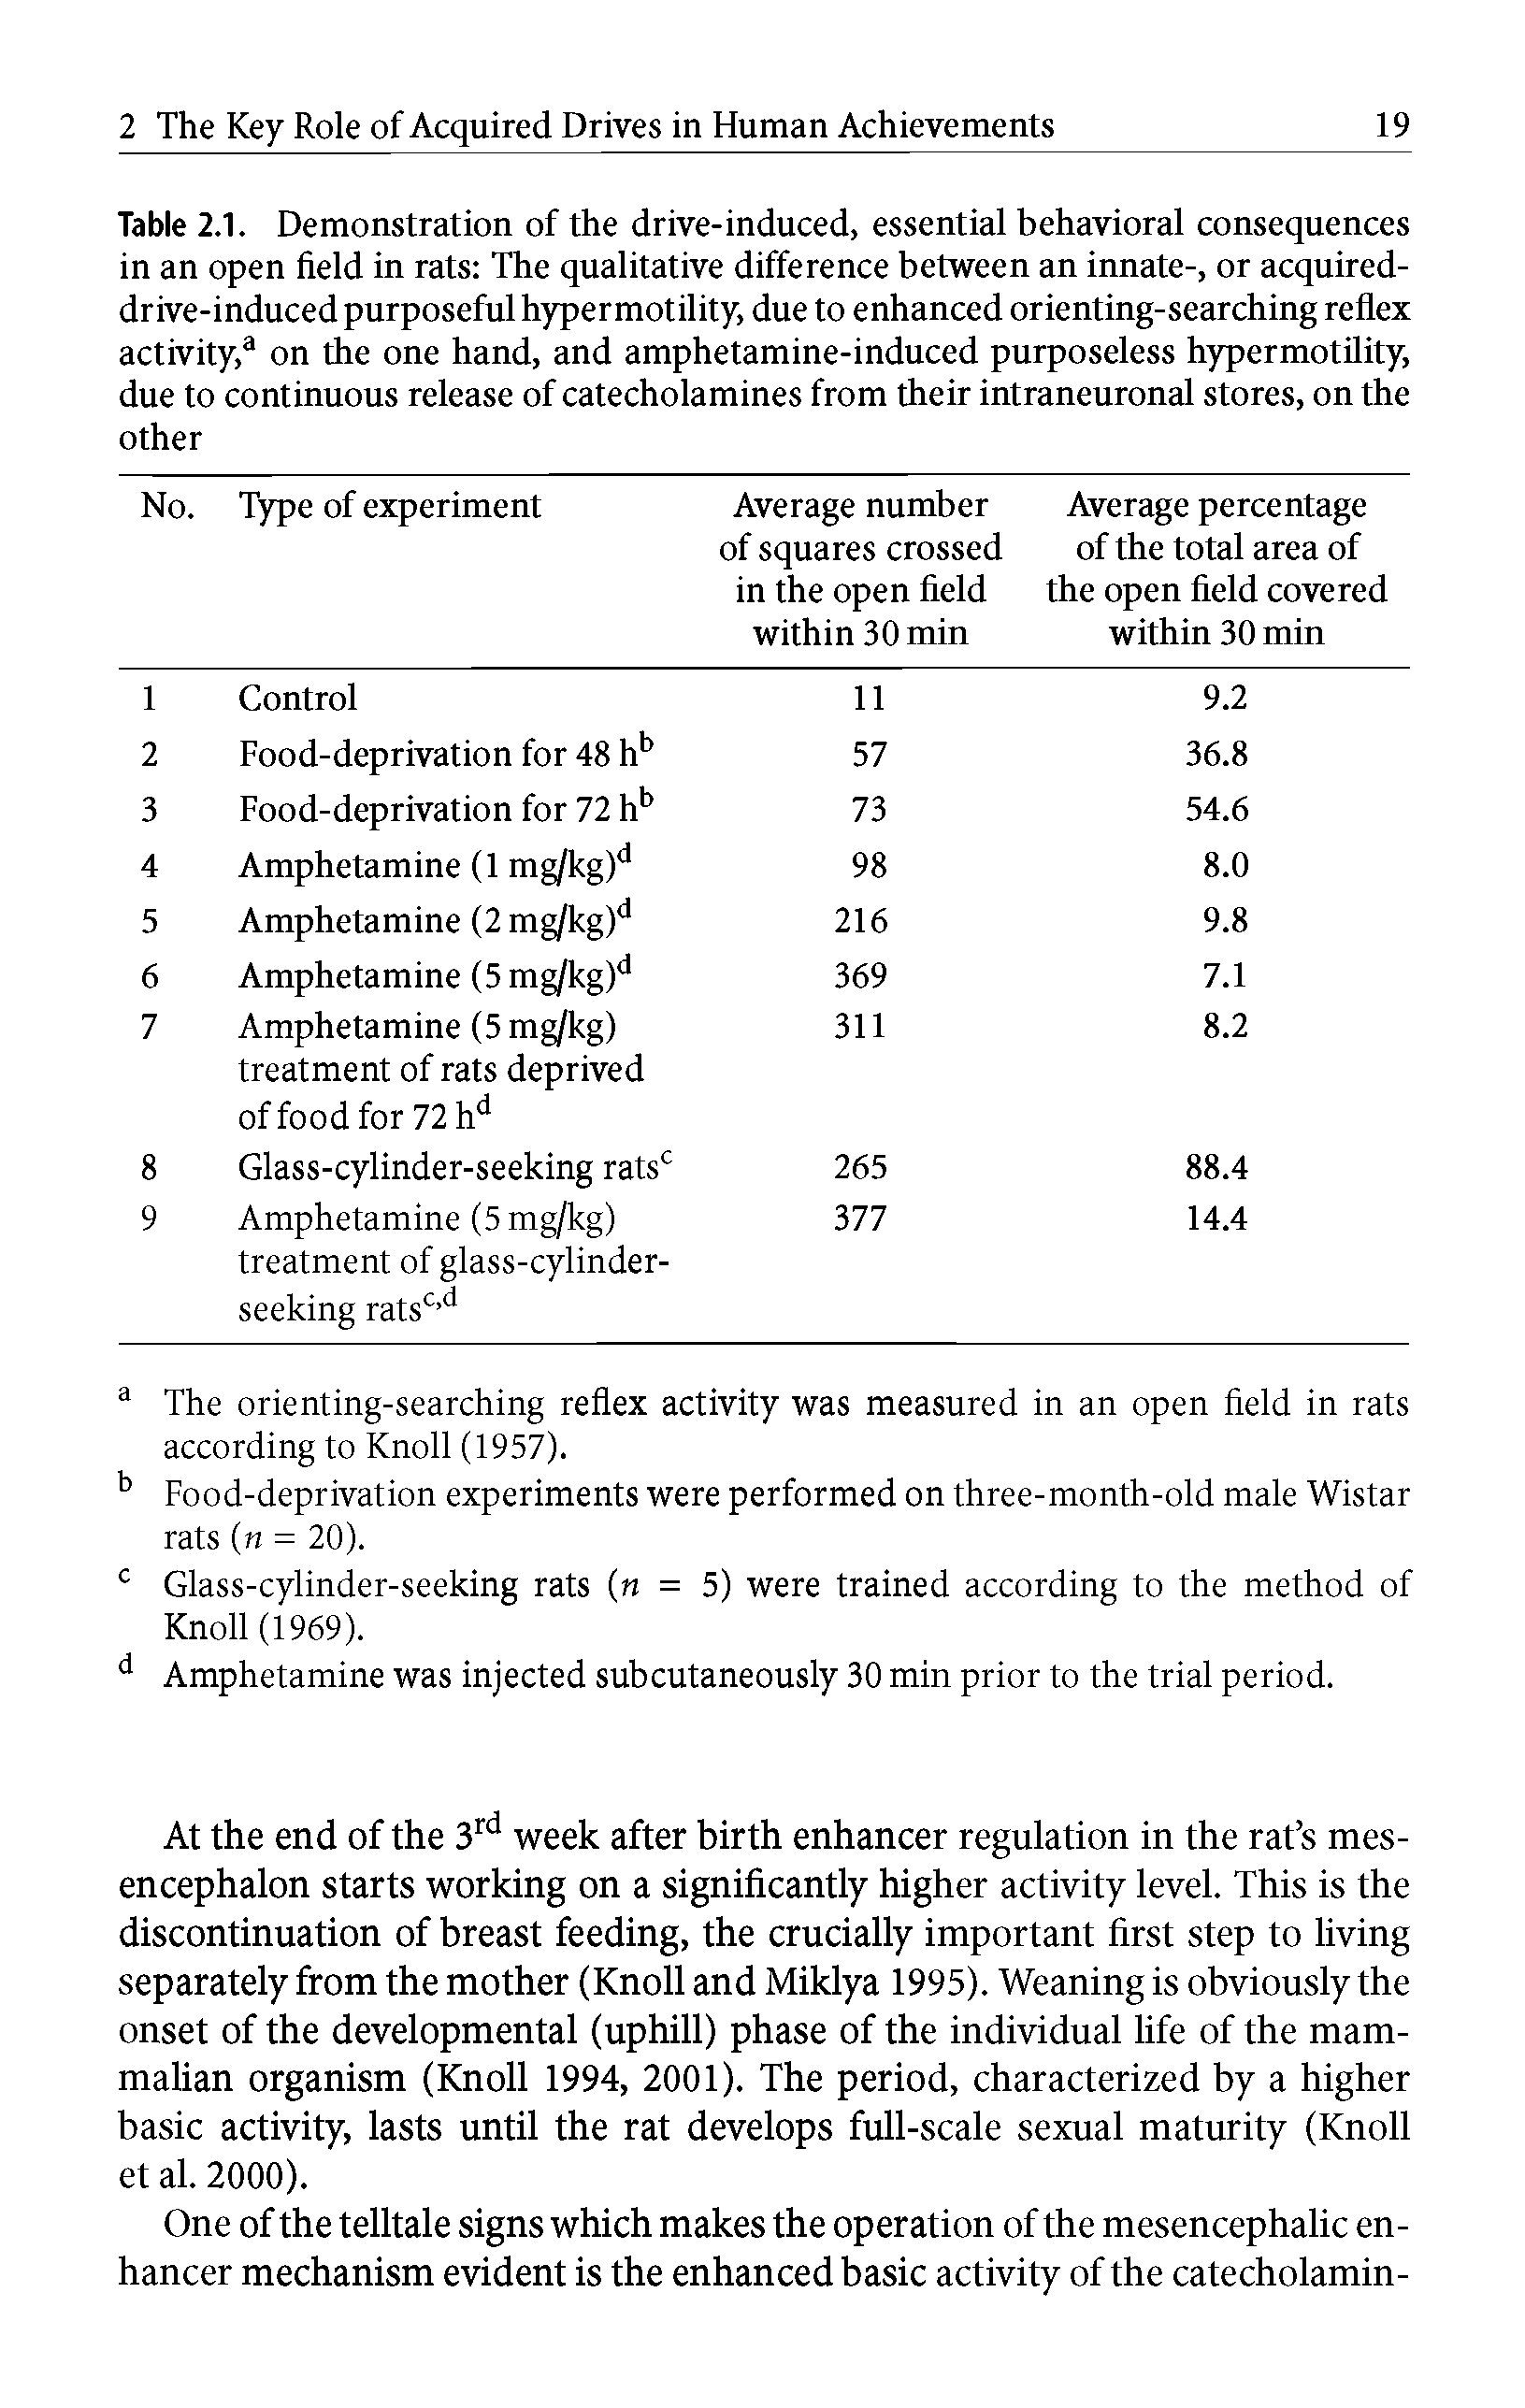 Table 2.1. Demonstration of the drive-induced, essential behavioral consequences in an open field in rats The qualitative difference between an innate-, or acquired-drive-induced purposeful hypermotility, due to enhanced orienting-searching reflex activity,3 on the one hand, and amphetamine-induced purposeless hypermotility, due to continuous release of catecholamines from their intraneuronal stores, on the other ...